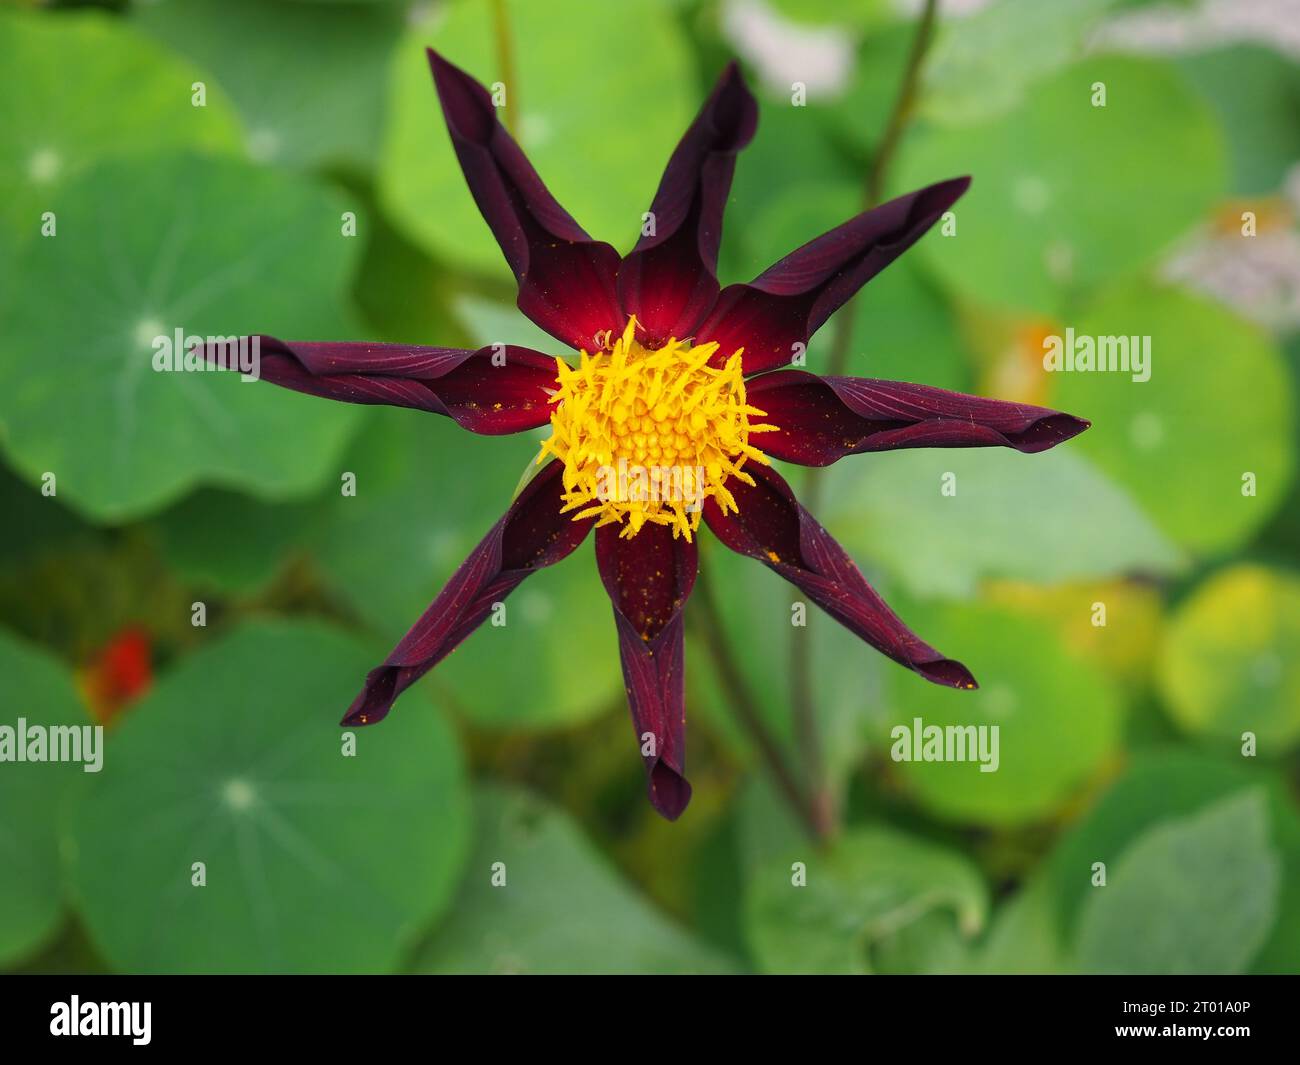 Close up of the Honka Black dahlia 'Verrone's Obsidian' flower in full bloom in an autumn garden border against a background of foliage Stock Photo